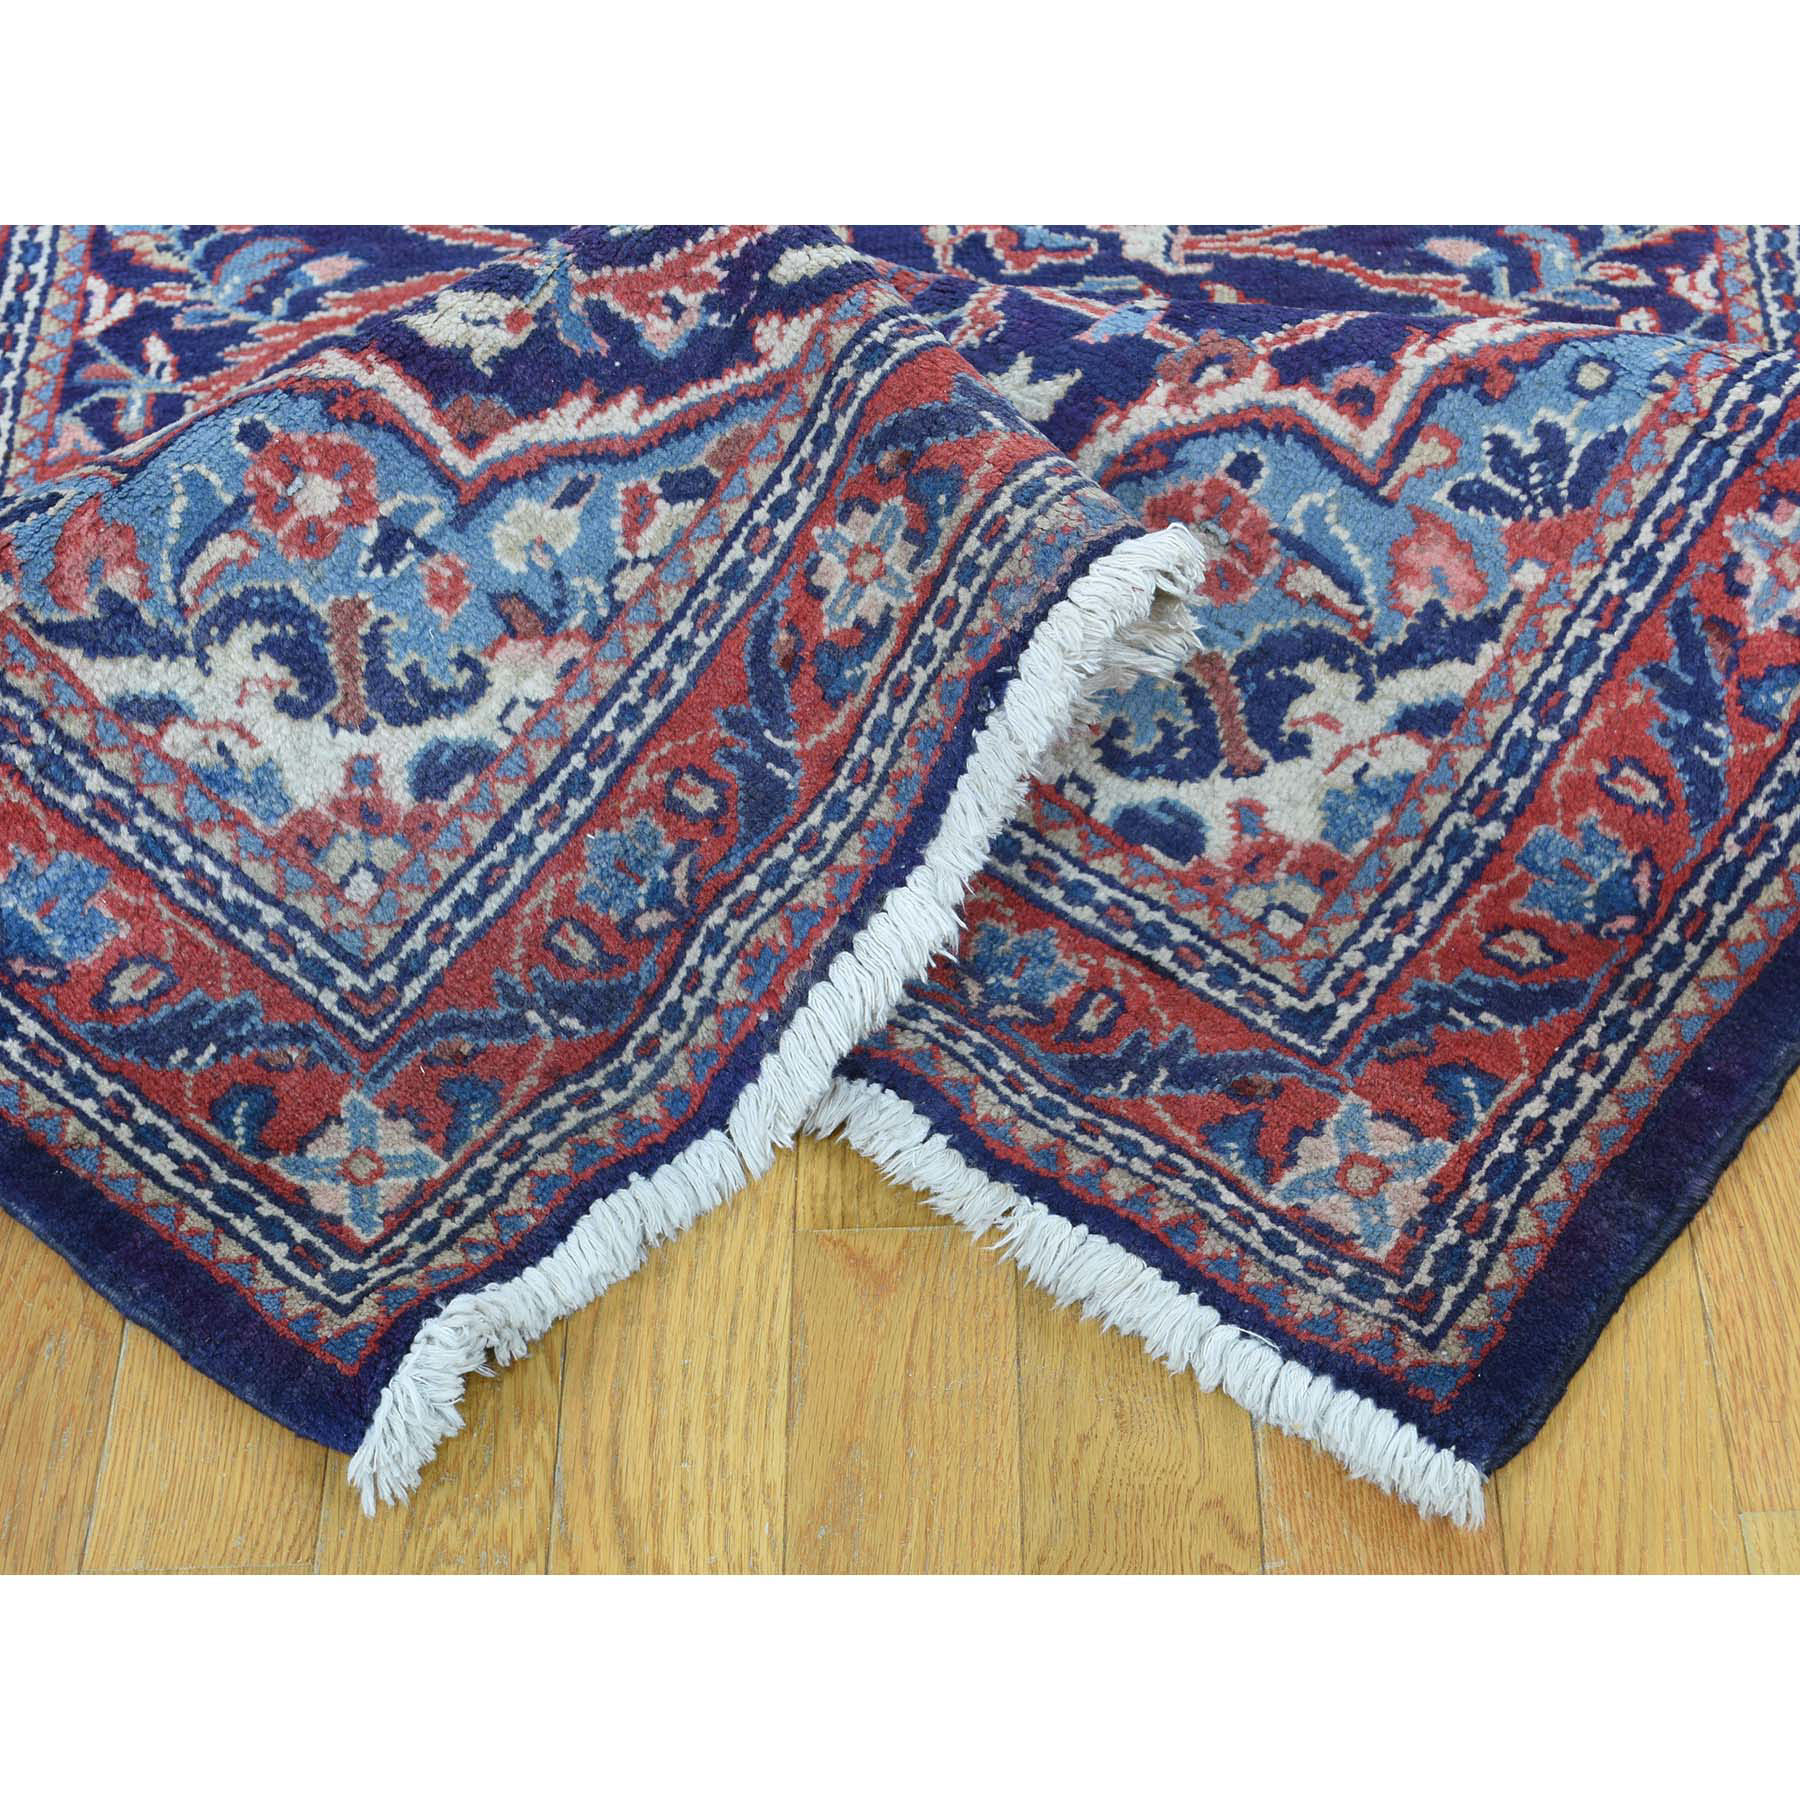 3-8 x13-4  Hand-Knotted Persian Mahal Wide Runner Oriental Rug 